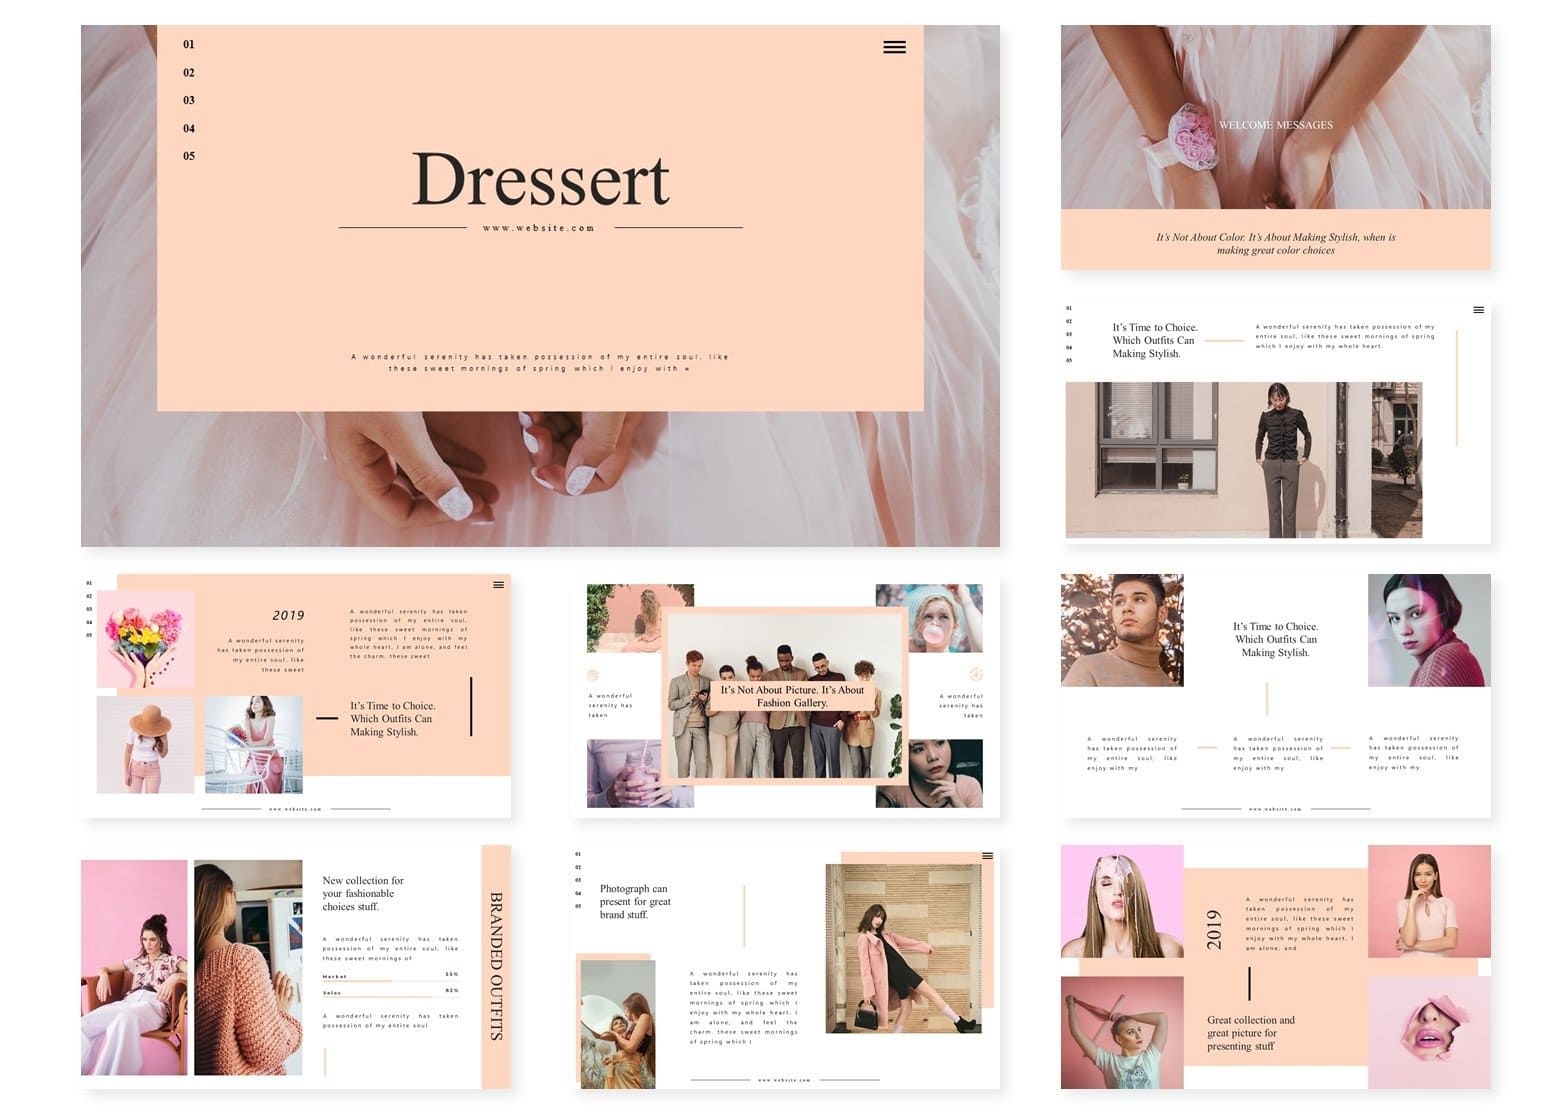 Inscription “It’s about making stylish, when is making great color choices” of Dressert Keynote Template.